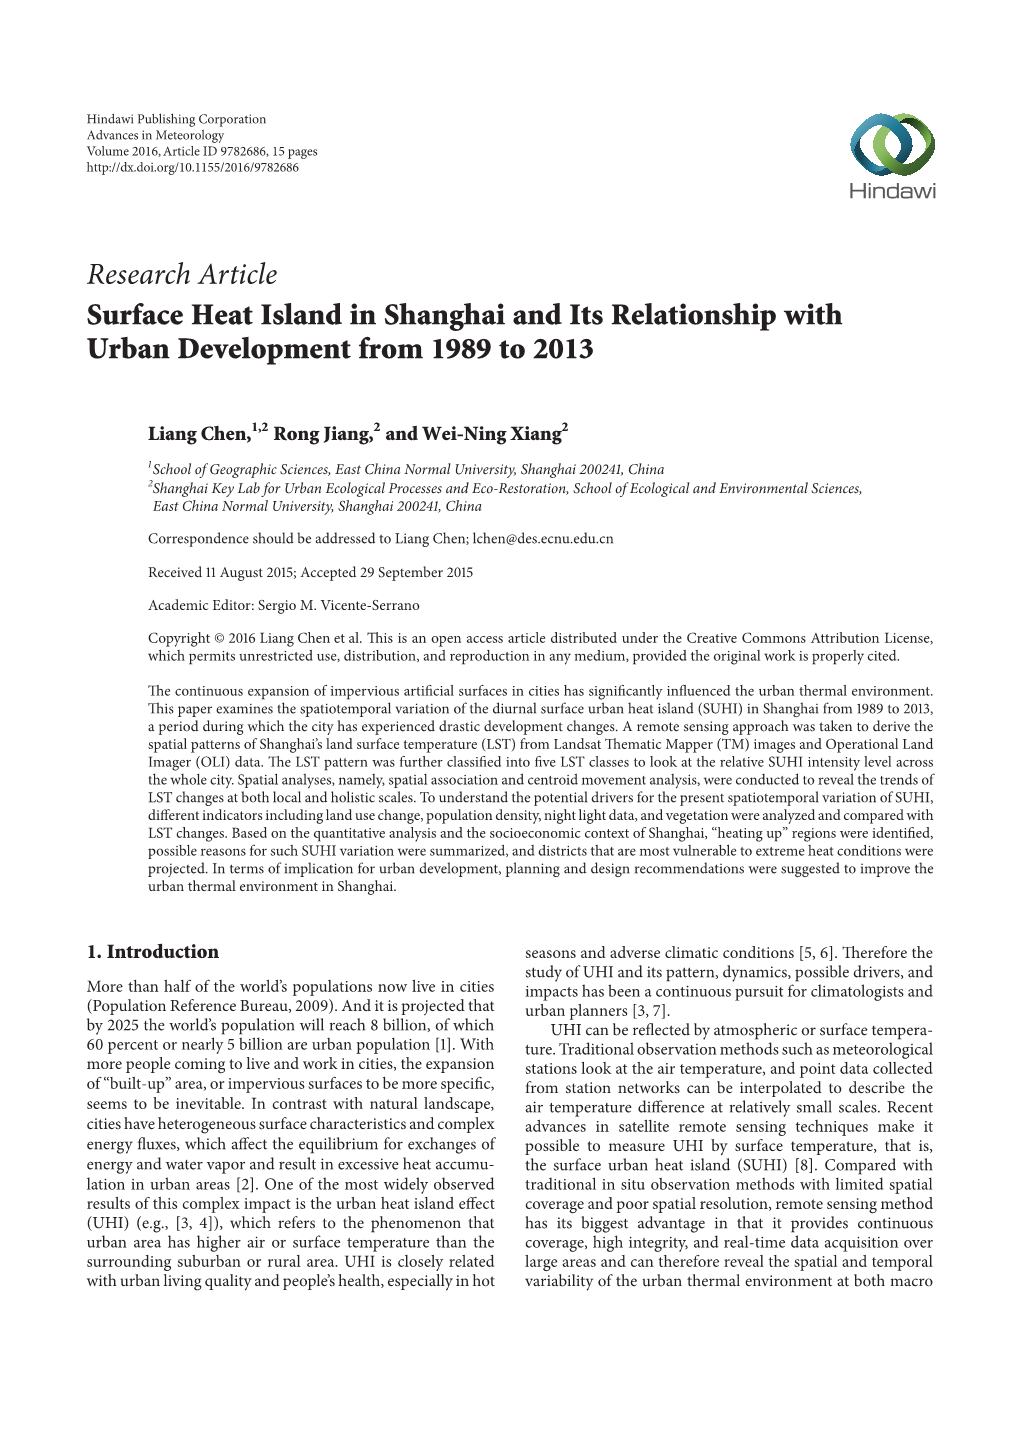 Research Article Surface Heat Island in Shanghai and Its Relationship with Urban Development from 1989 to 2013